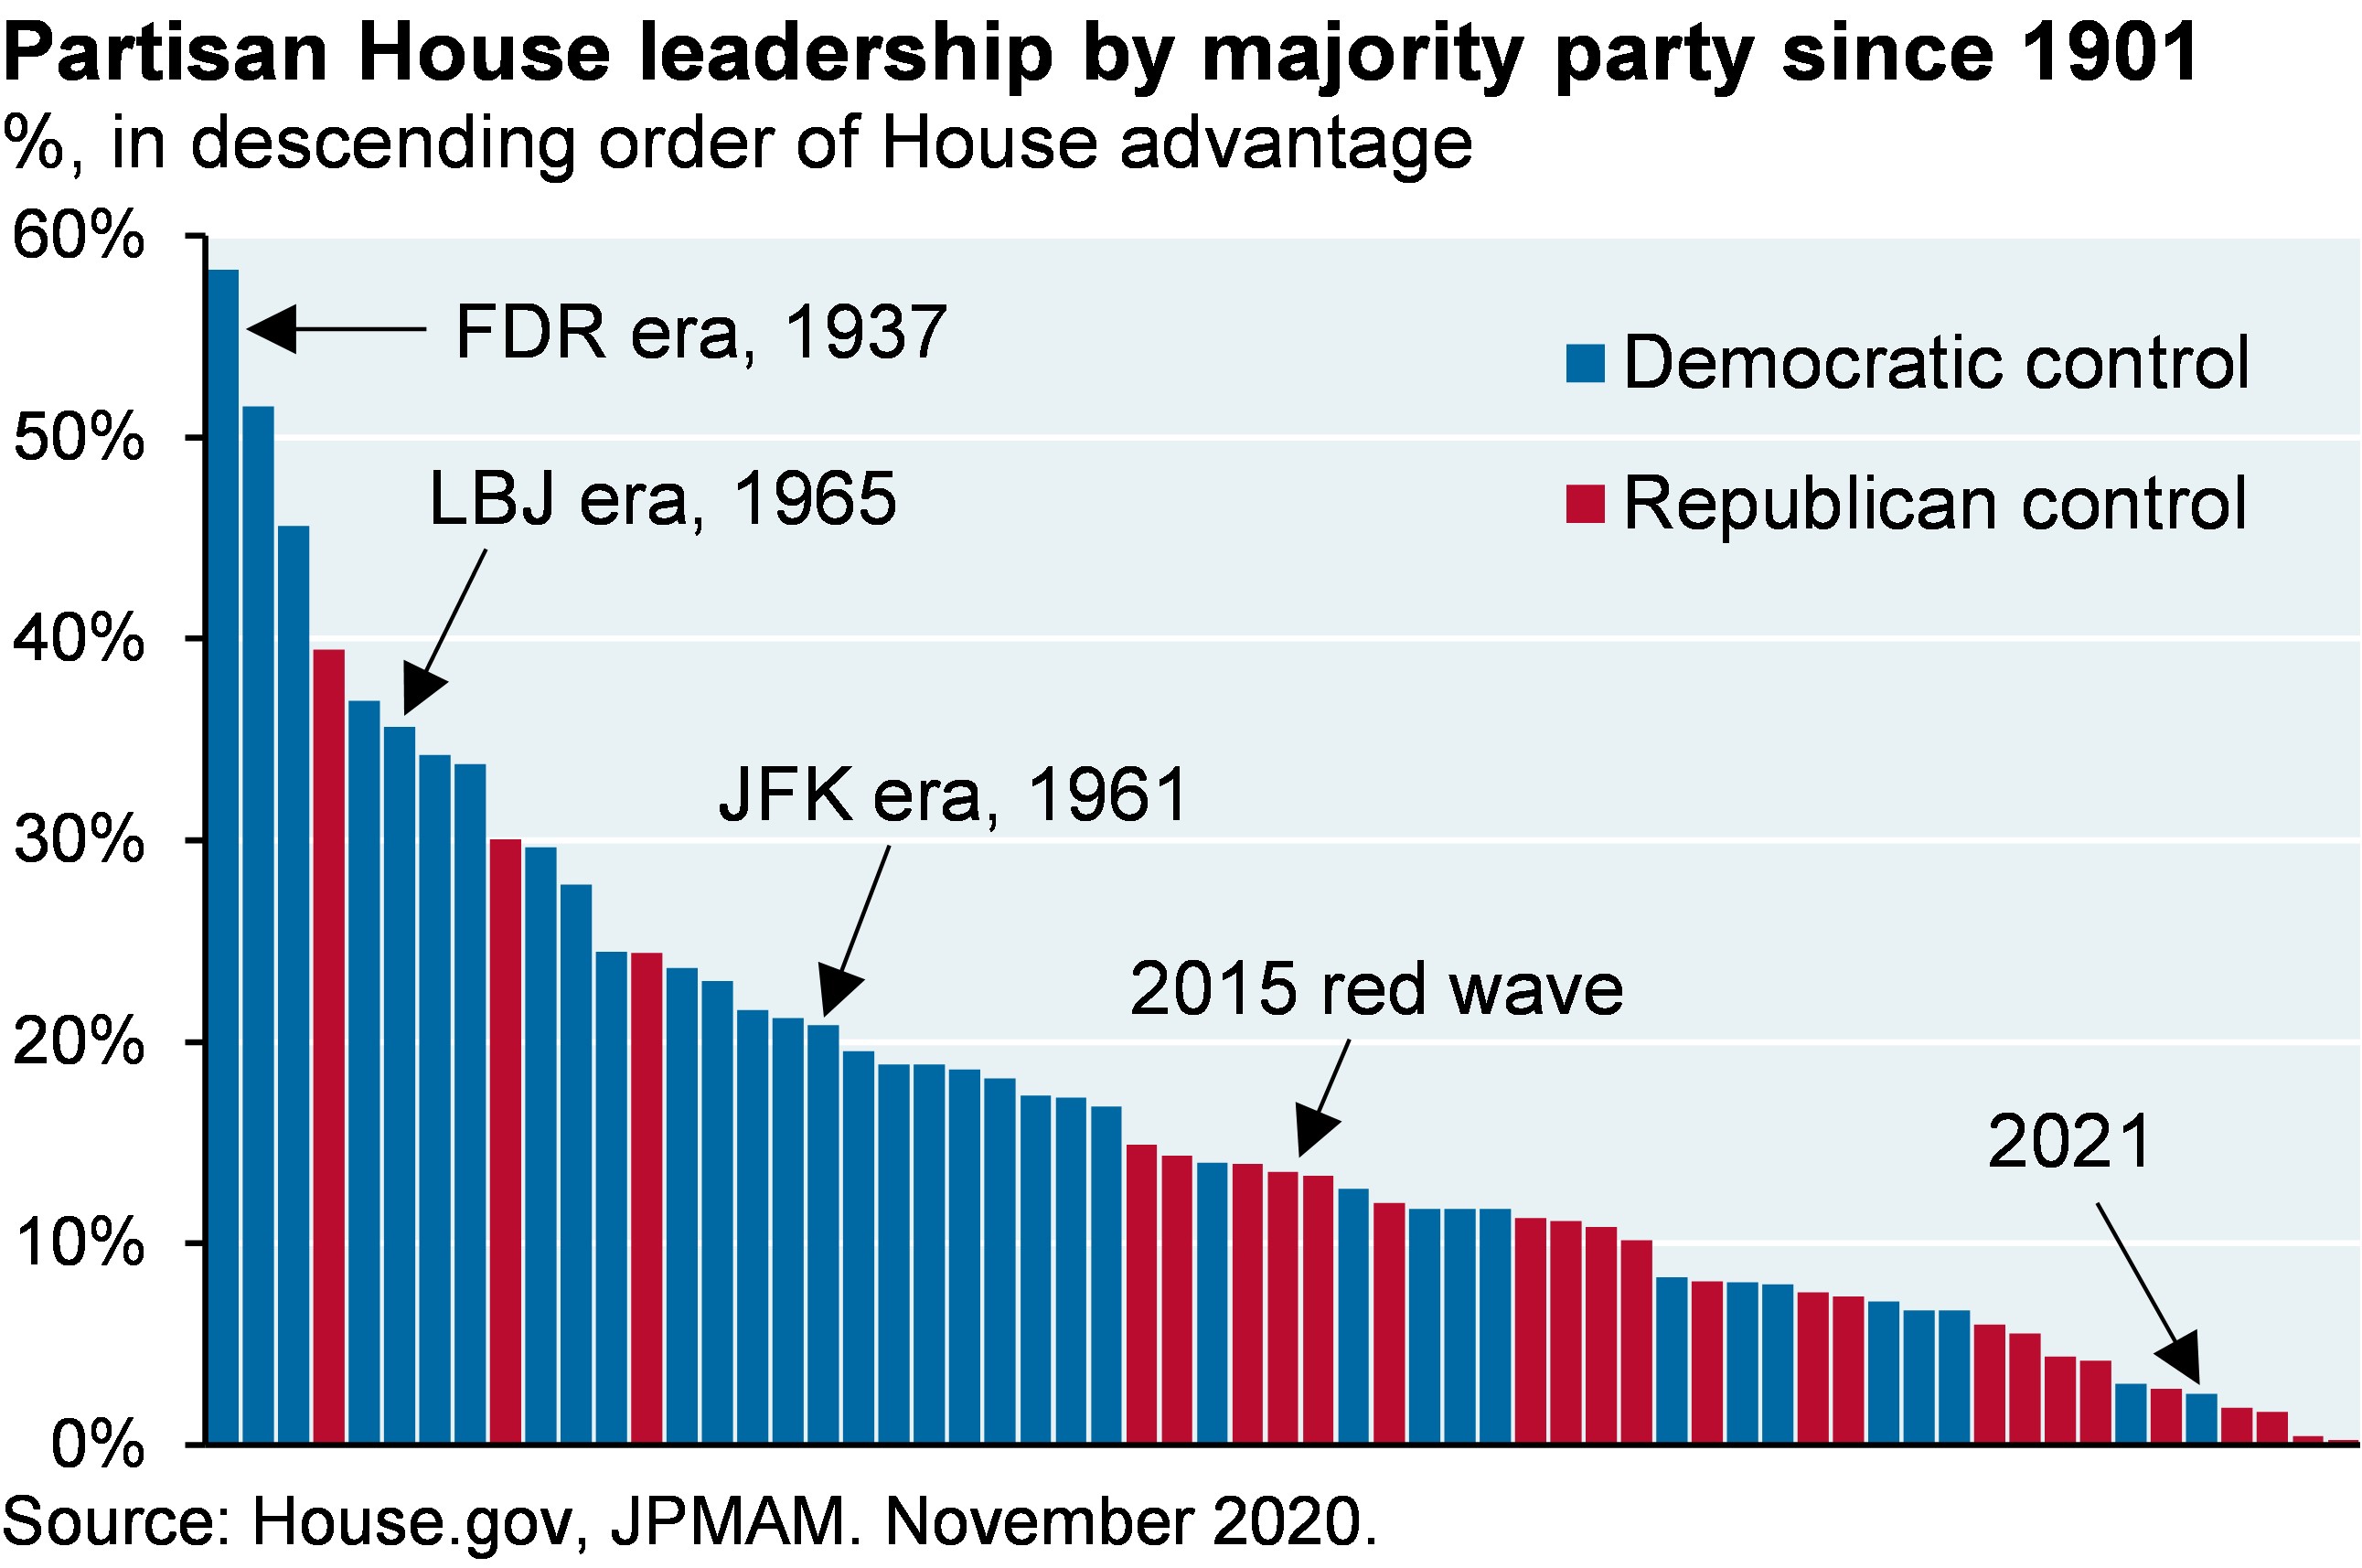 Bar chart displays the percent advantage of the House majority party (given by the % of majority party seats - % of minority party seats) since 1901 in descending order. Recent years tend to exhibit a narrower margin for House leadership. House Democrats during the FDR era (1937) had a 58% advantage over Republicans. In 2015, the margin of Republican control was 14%, while in 2021, the margin of Democratic control was just 2%. 